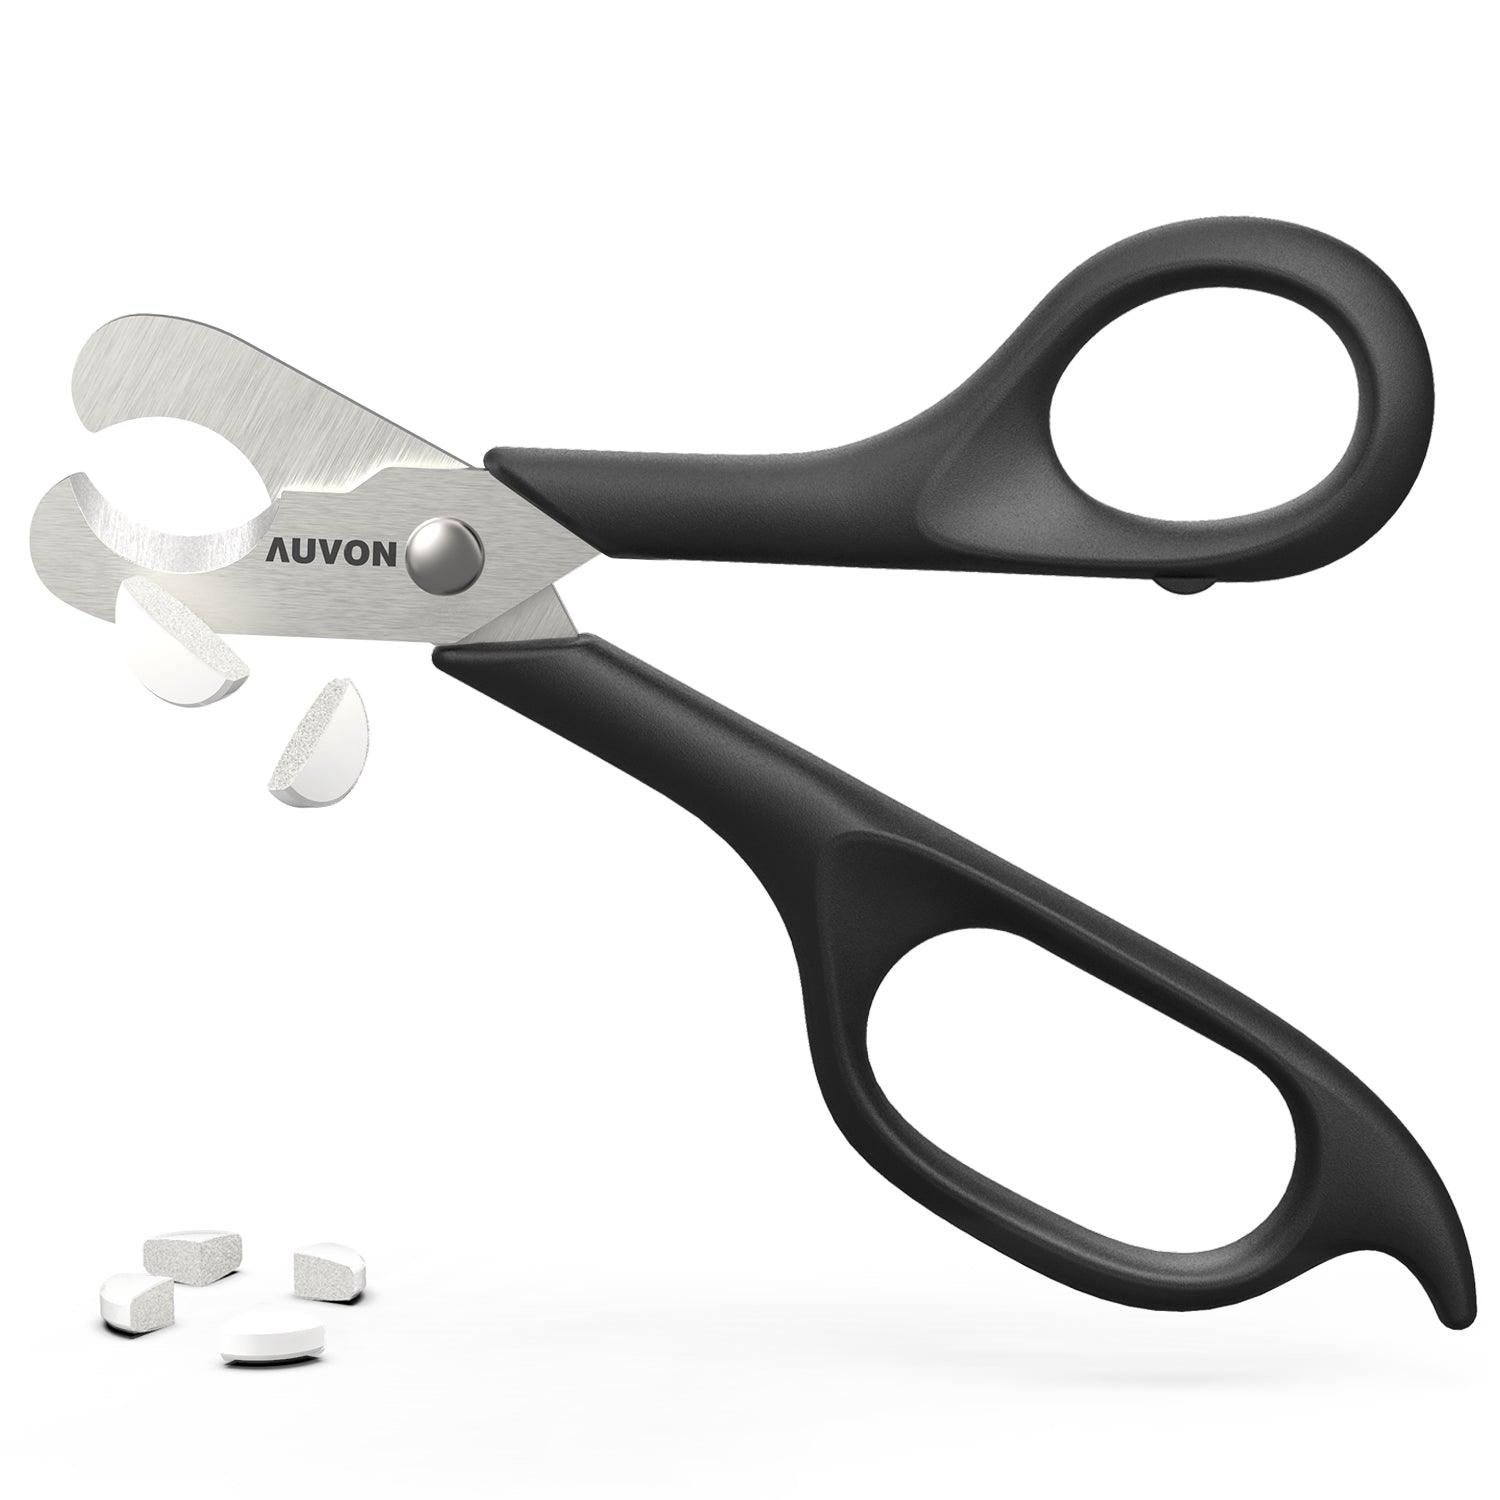 http://auvonhealth.com/cdn/shop/files/auvon-scissors-shaped-pill-cutter-sharp-blade-pill-splitter-for-accurately-dividing-various-size-of-vitamins-tablets-and-medications-in-half-auvon-1_2563816e-6259-48c6-a82f-1e6640fb1213.jpg?v=1686019810